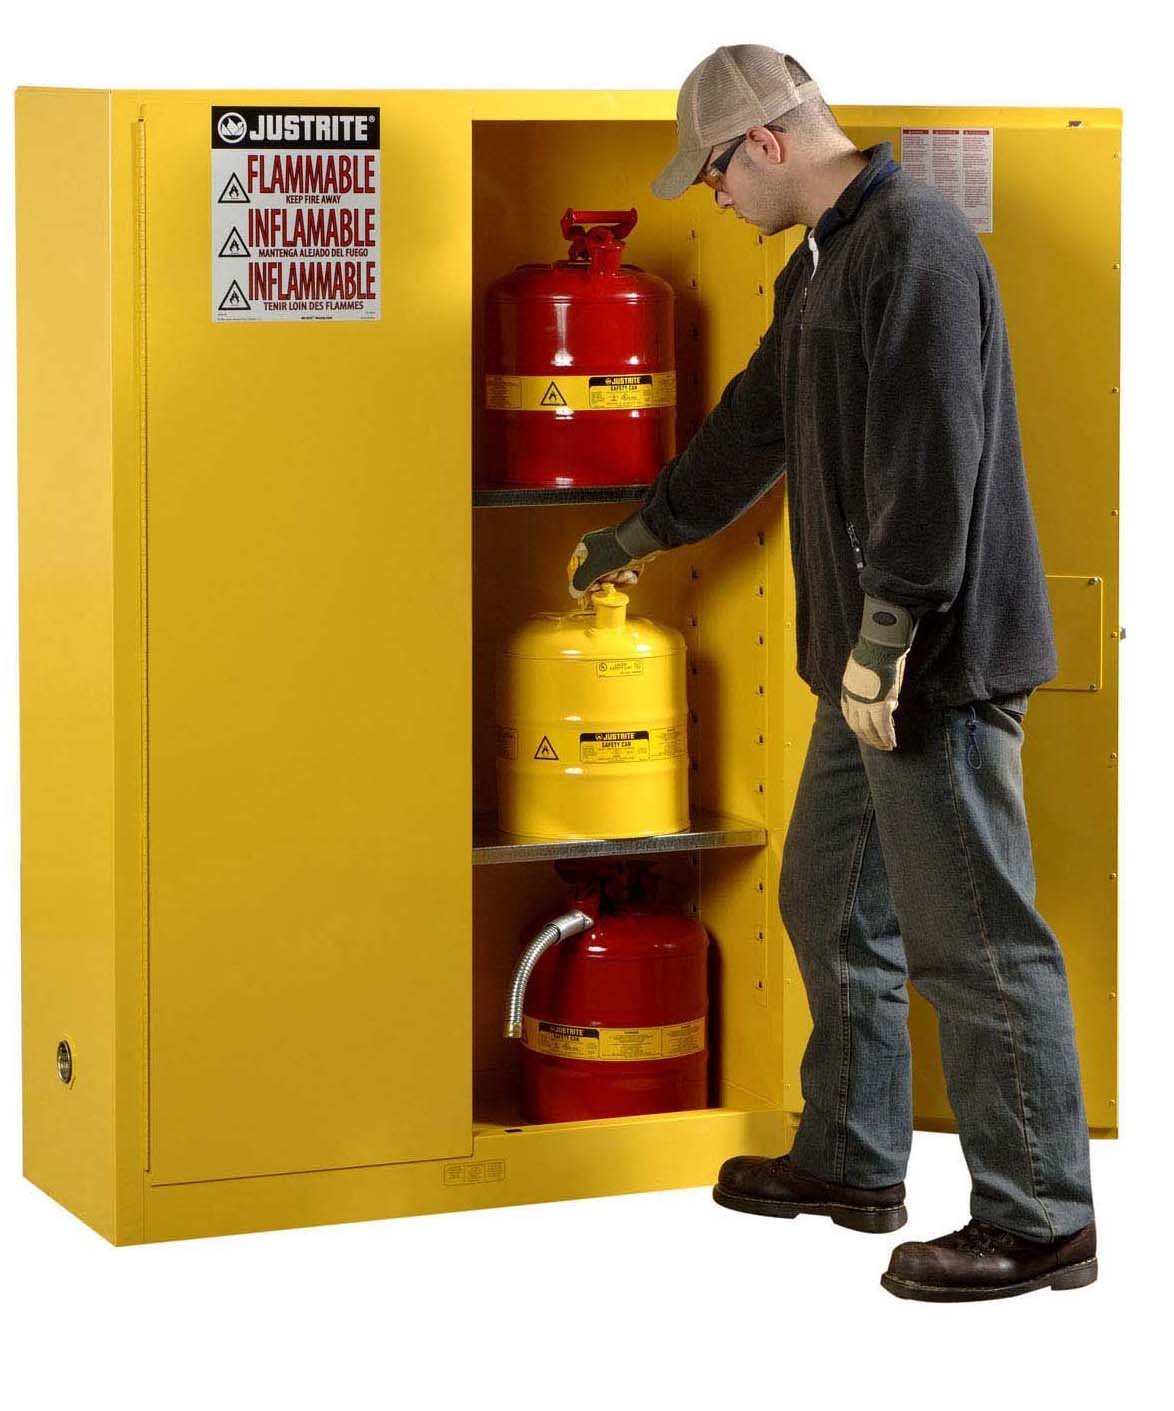 Flammable Storage Cabinet The Storage Home Guide